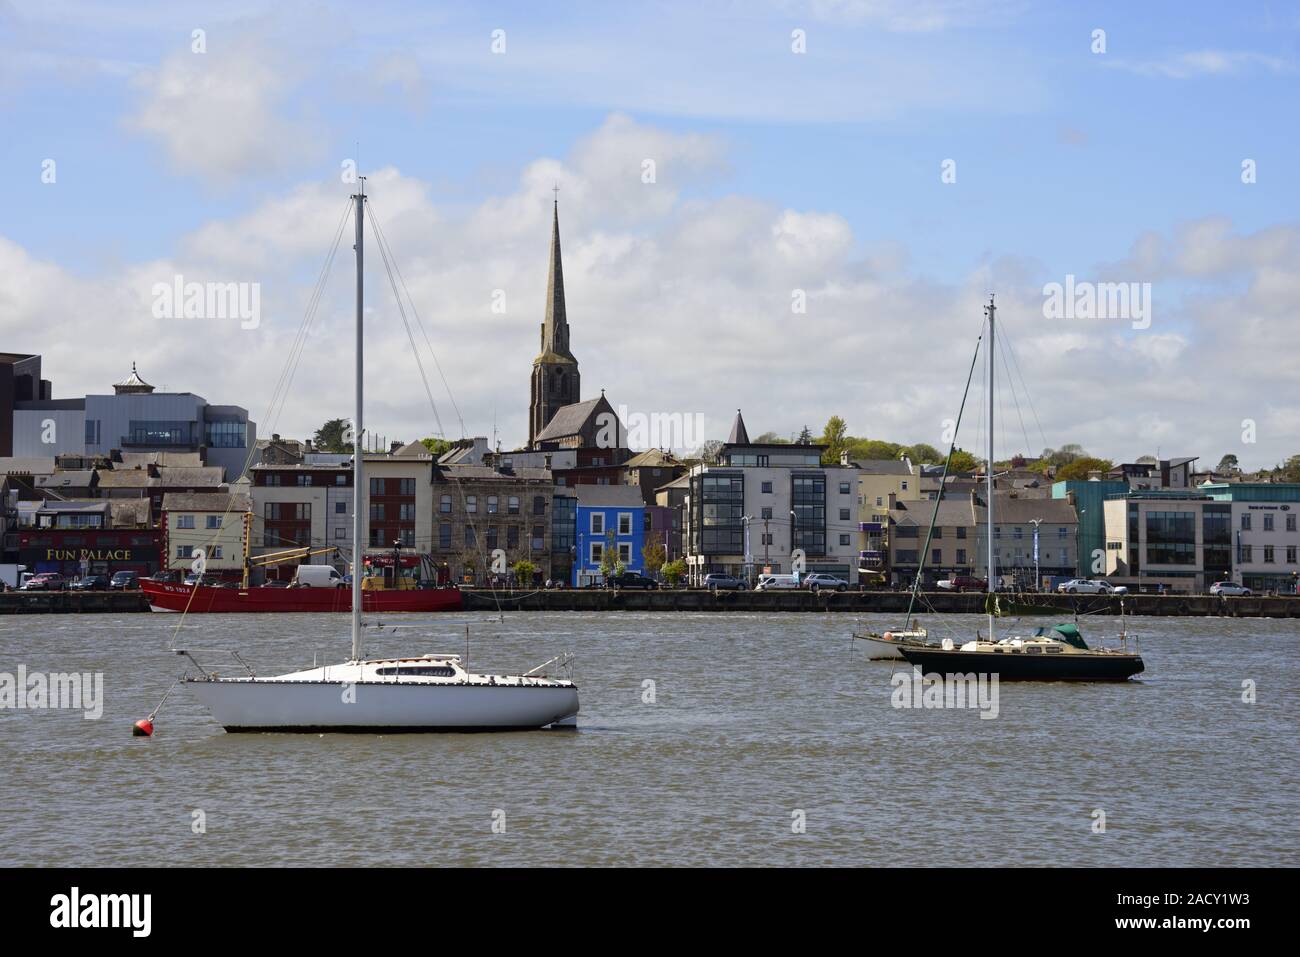 City view of Wexford Stock Photo